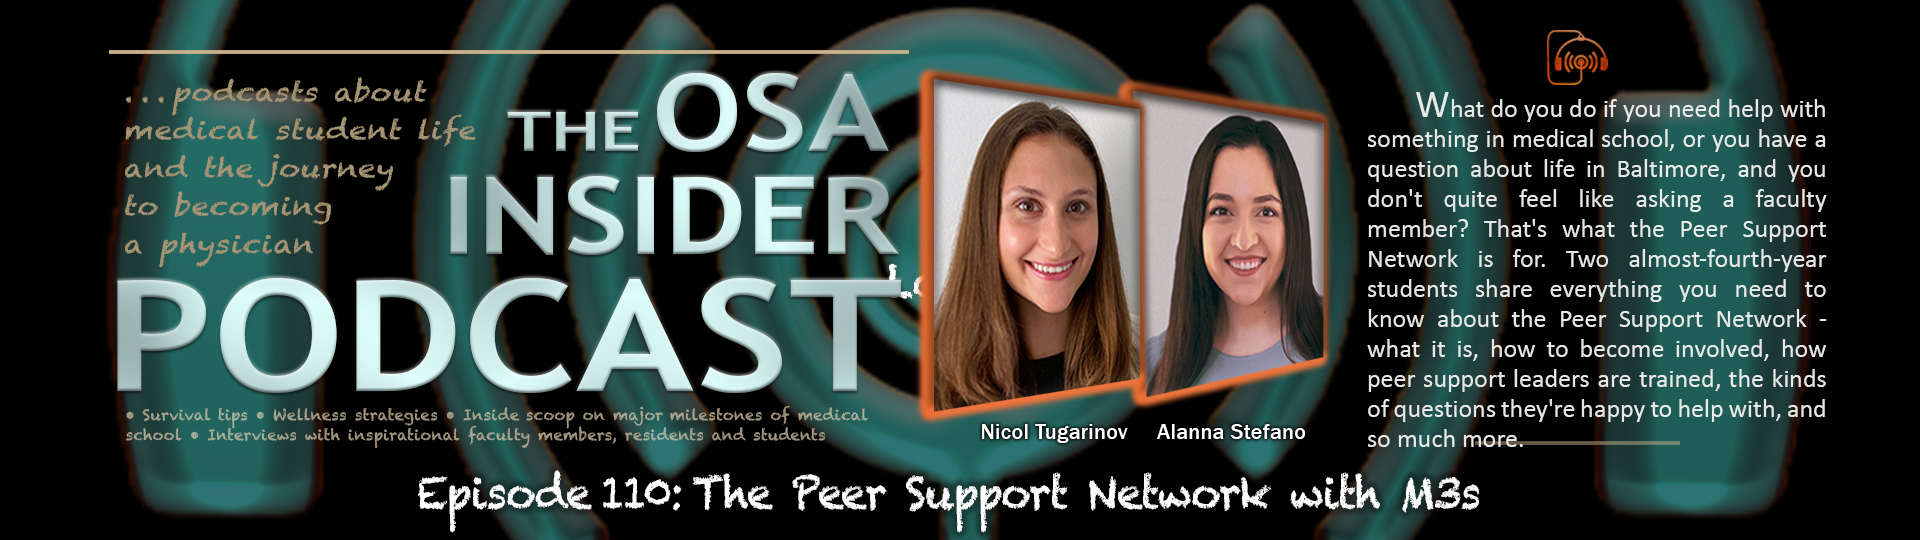 The Peer Support Network